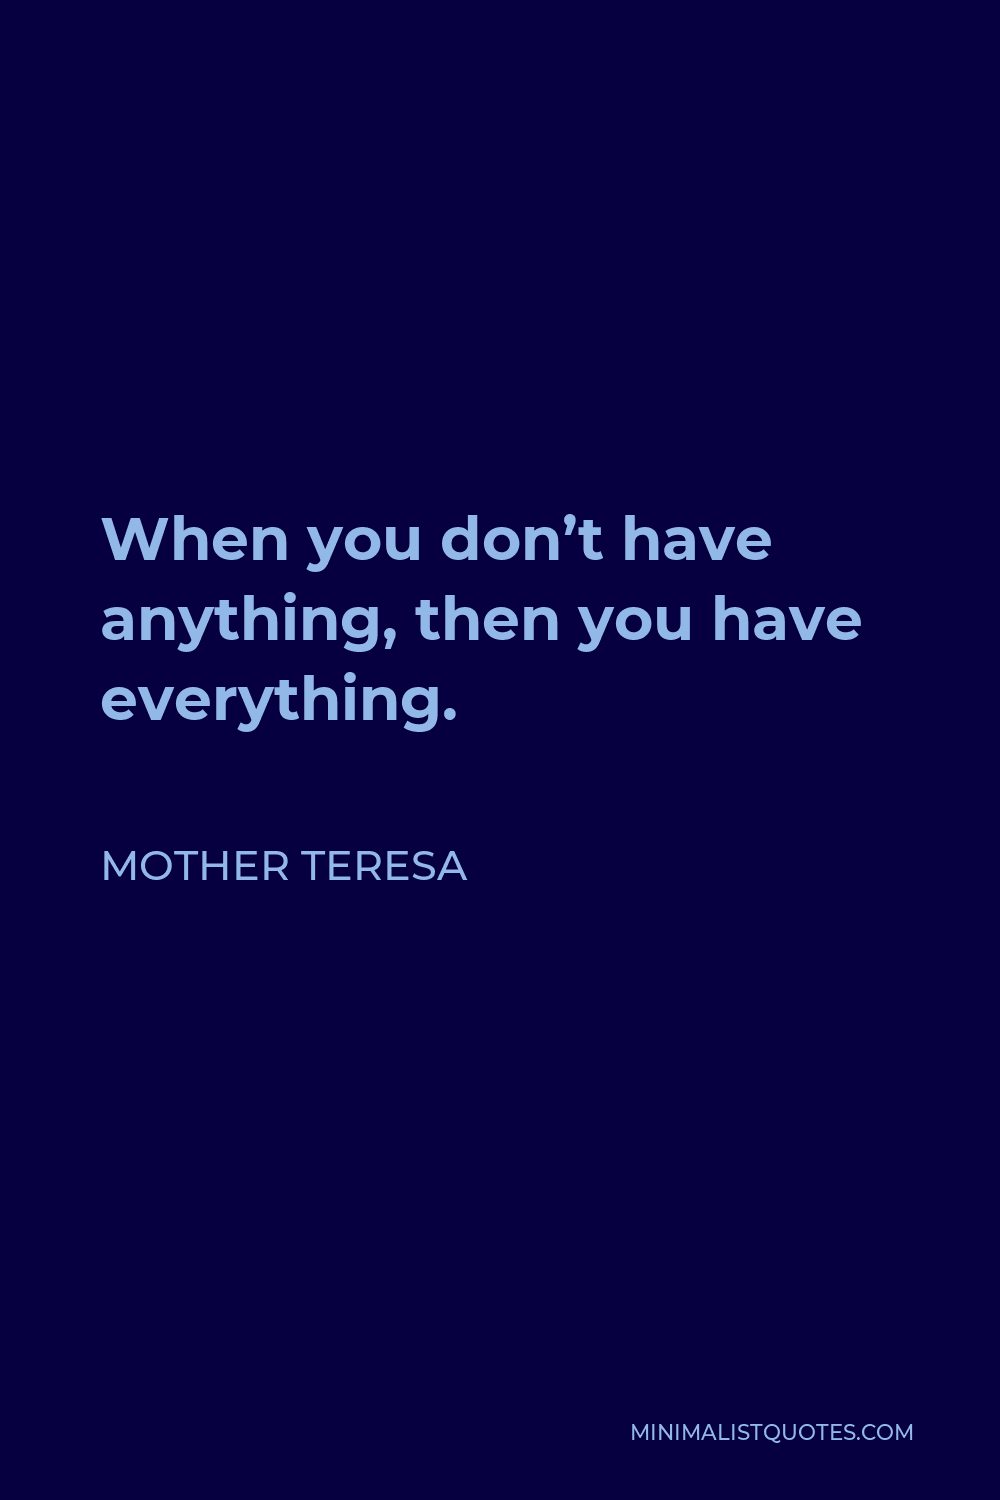 Mother Teresa Quote - When you don’t have anything, then you have everything.